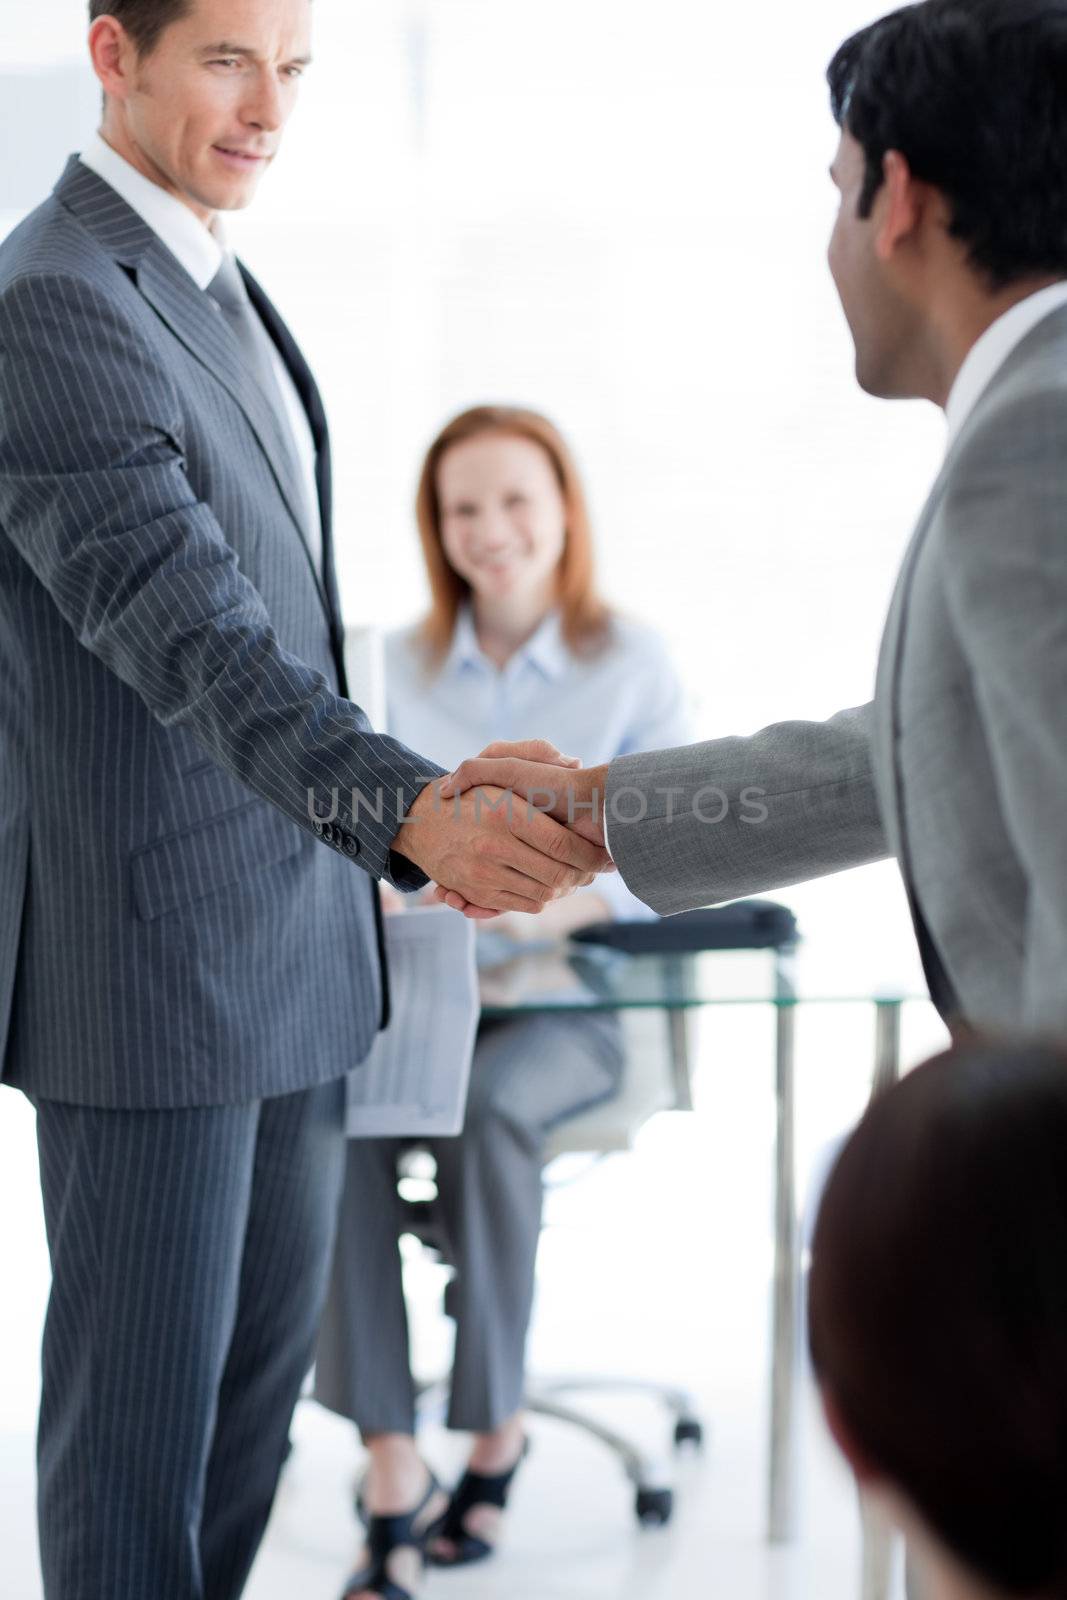 Businessmen greeting each other at a job interview in an office